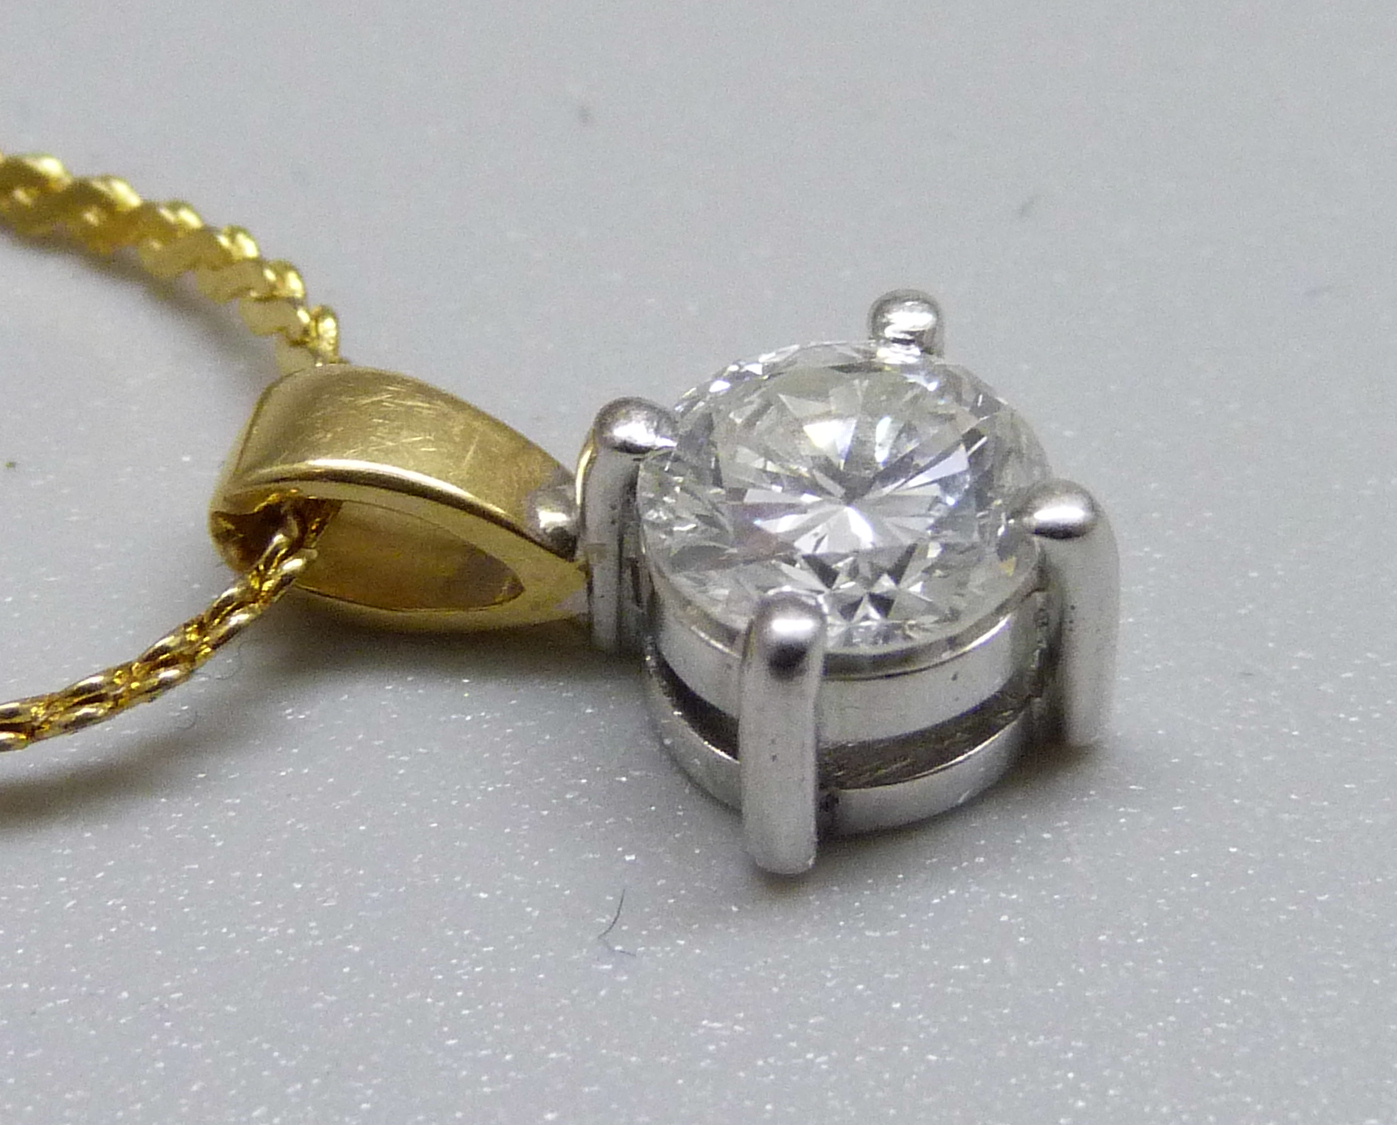 An 18ct gold and diamond pendant, approximately 0.90ct diamond weight, on a plated chain - Image 3 of 3